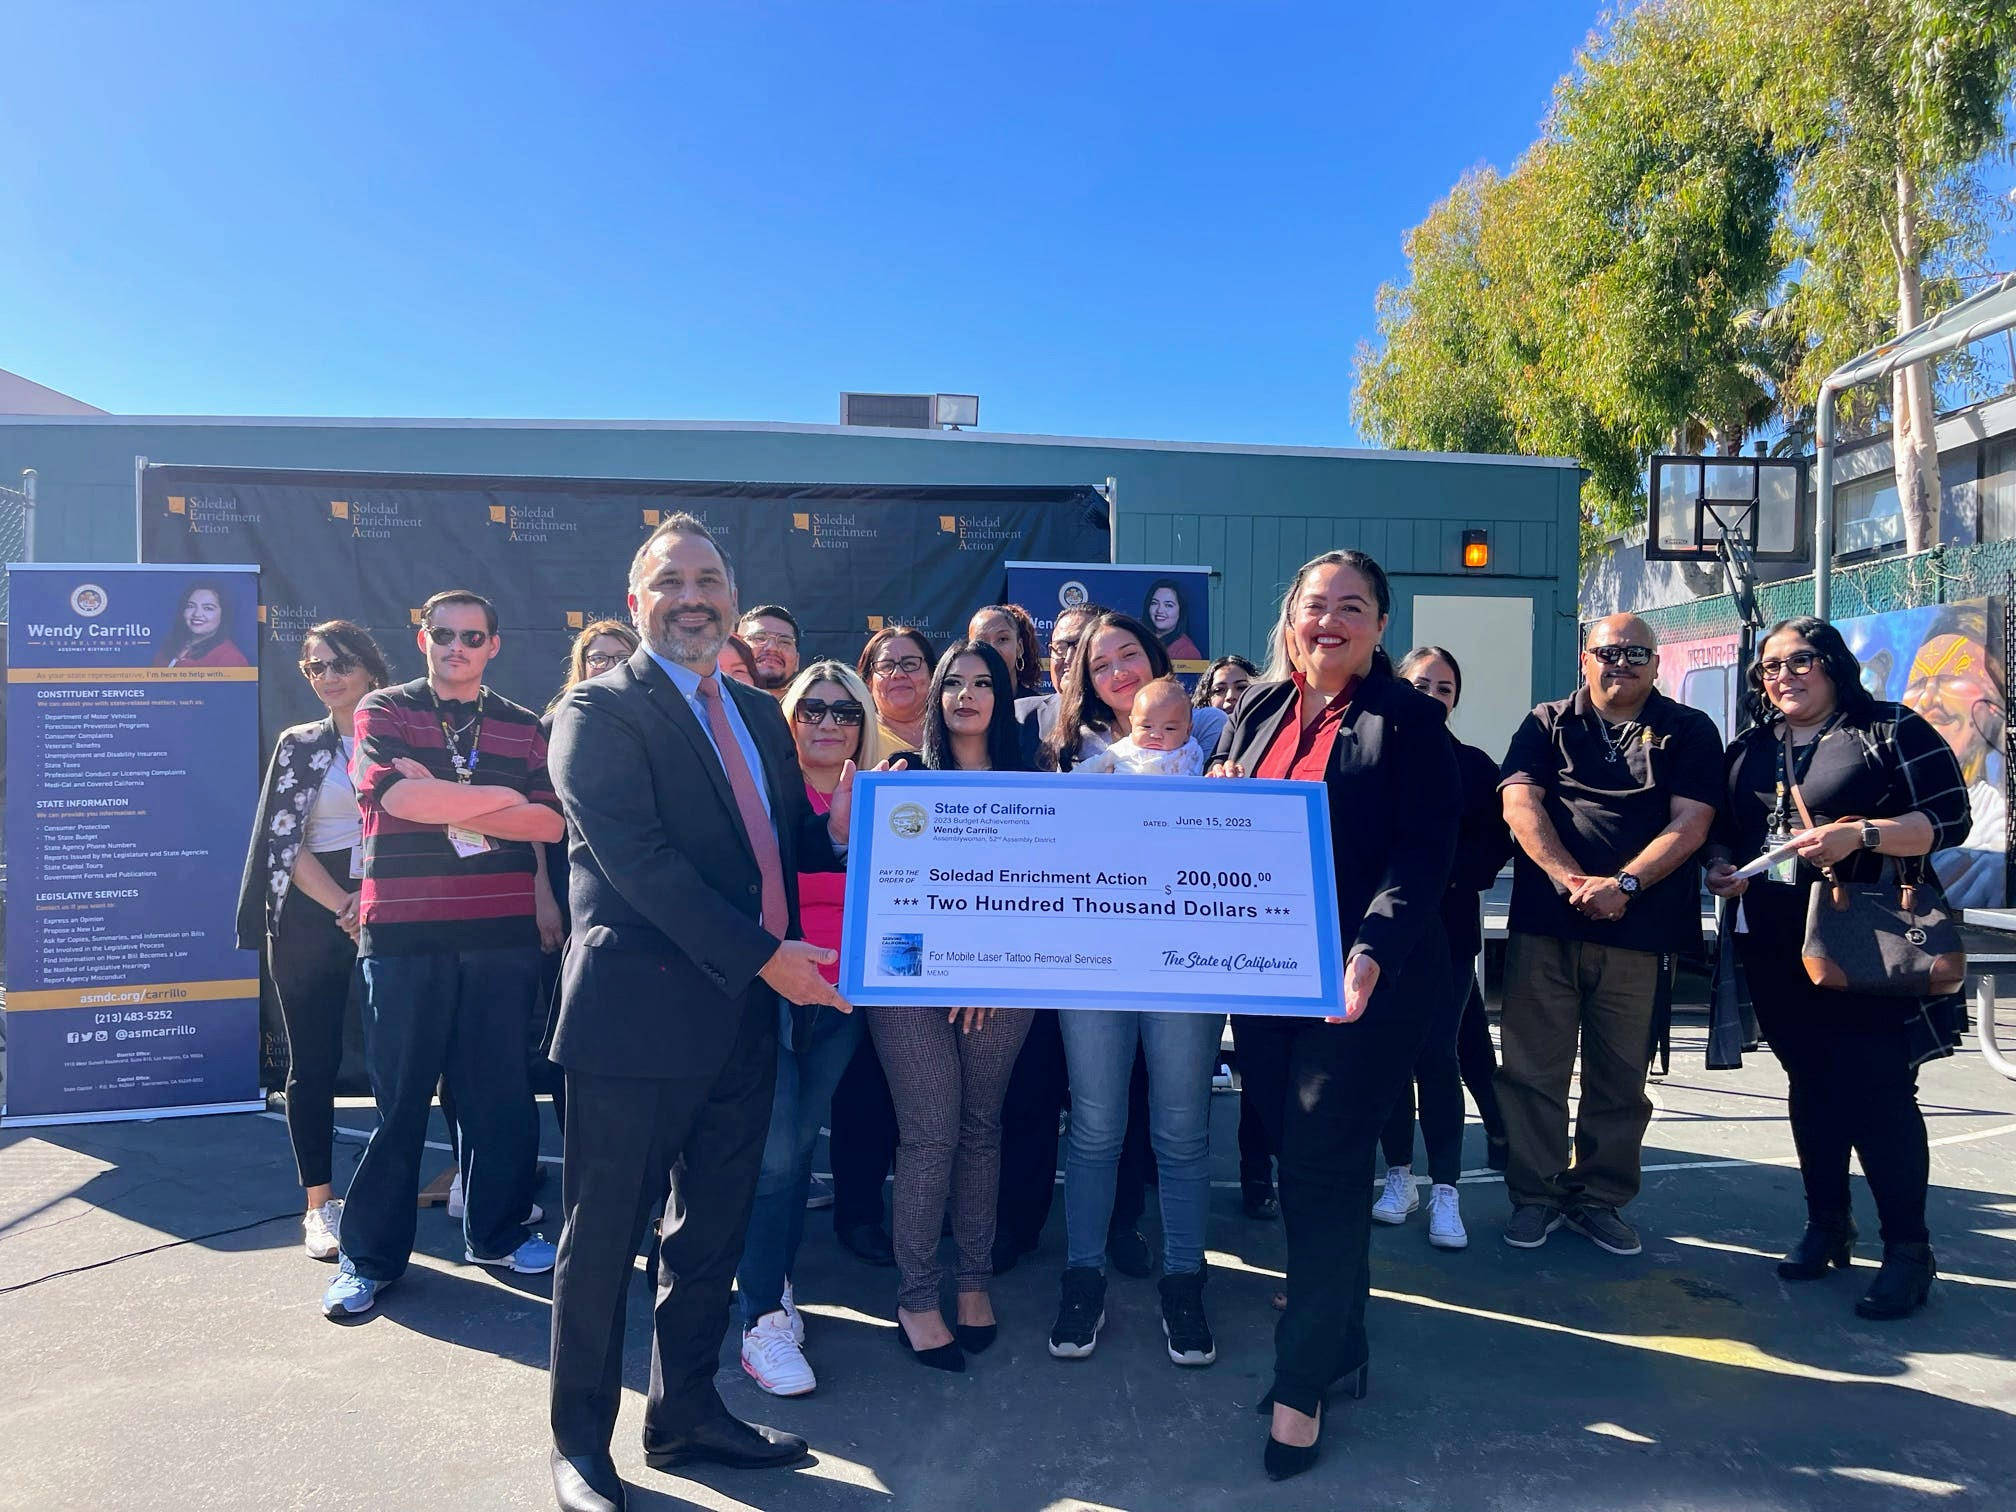 Assemblywoman Carrillo presents check to Nathan Arias, President & CEO at Soledad Enrichment Action, surrounded by other people.